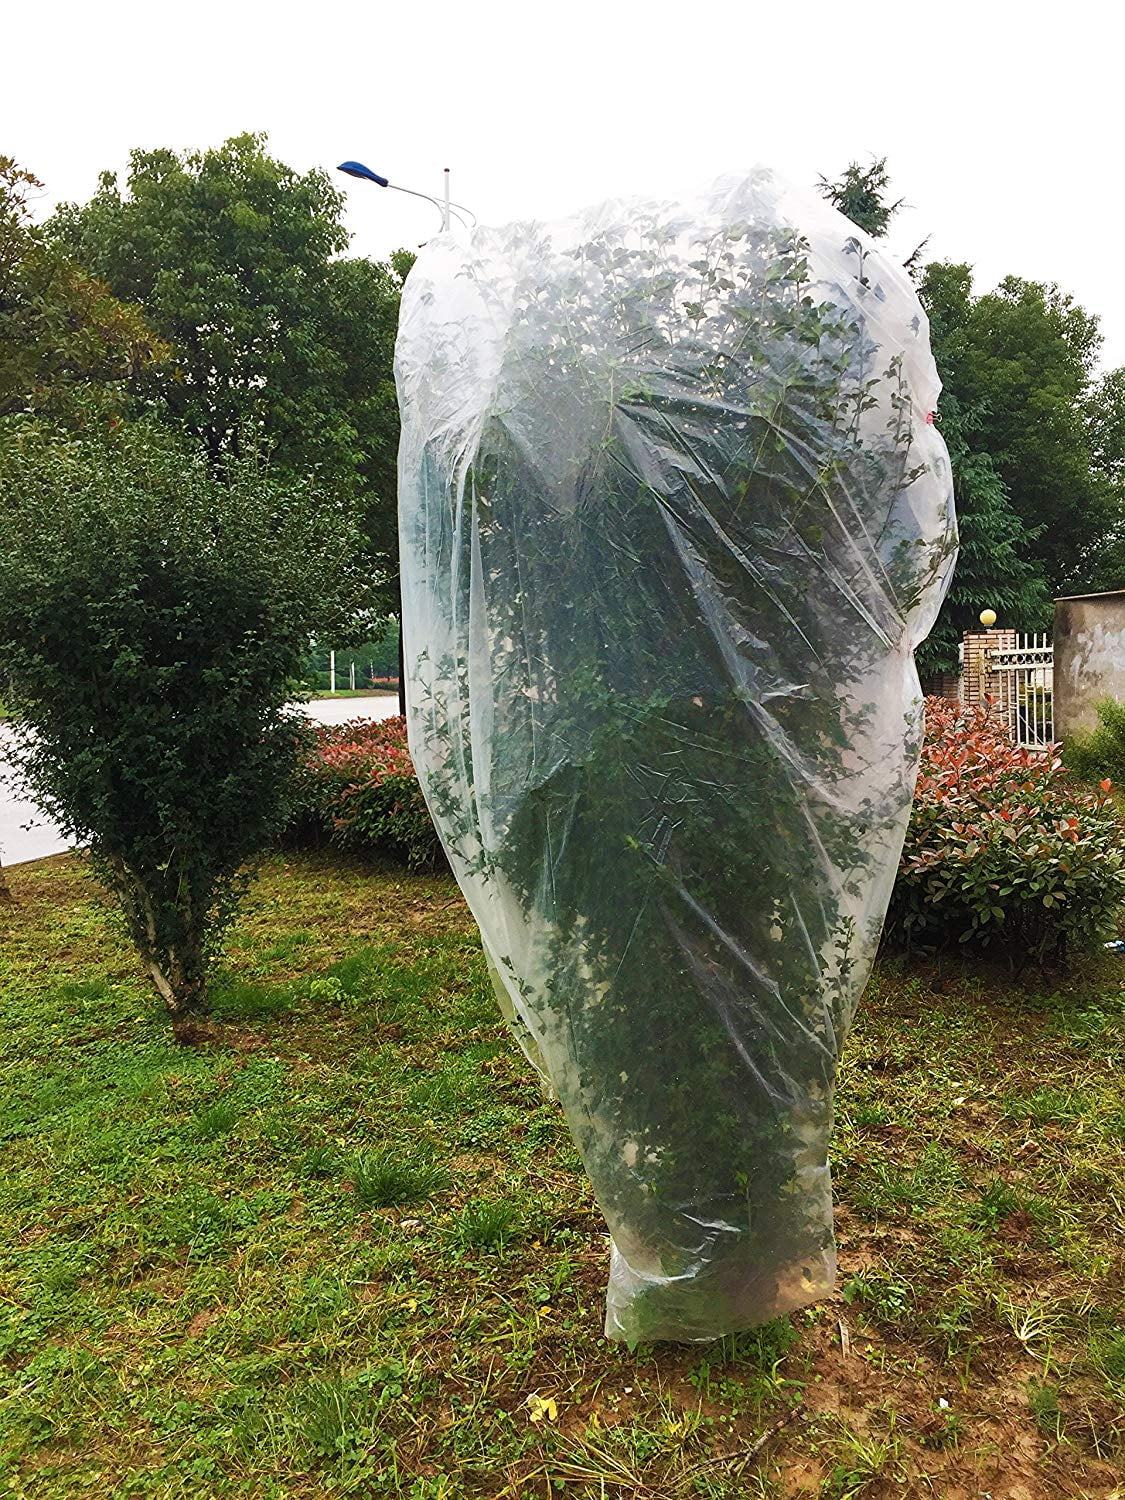 Agfabric 0.55oz Fabric Plant Cover Bags for Frost Protection/Summer Shade 84x72" 